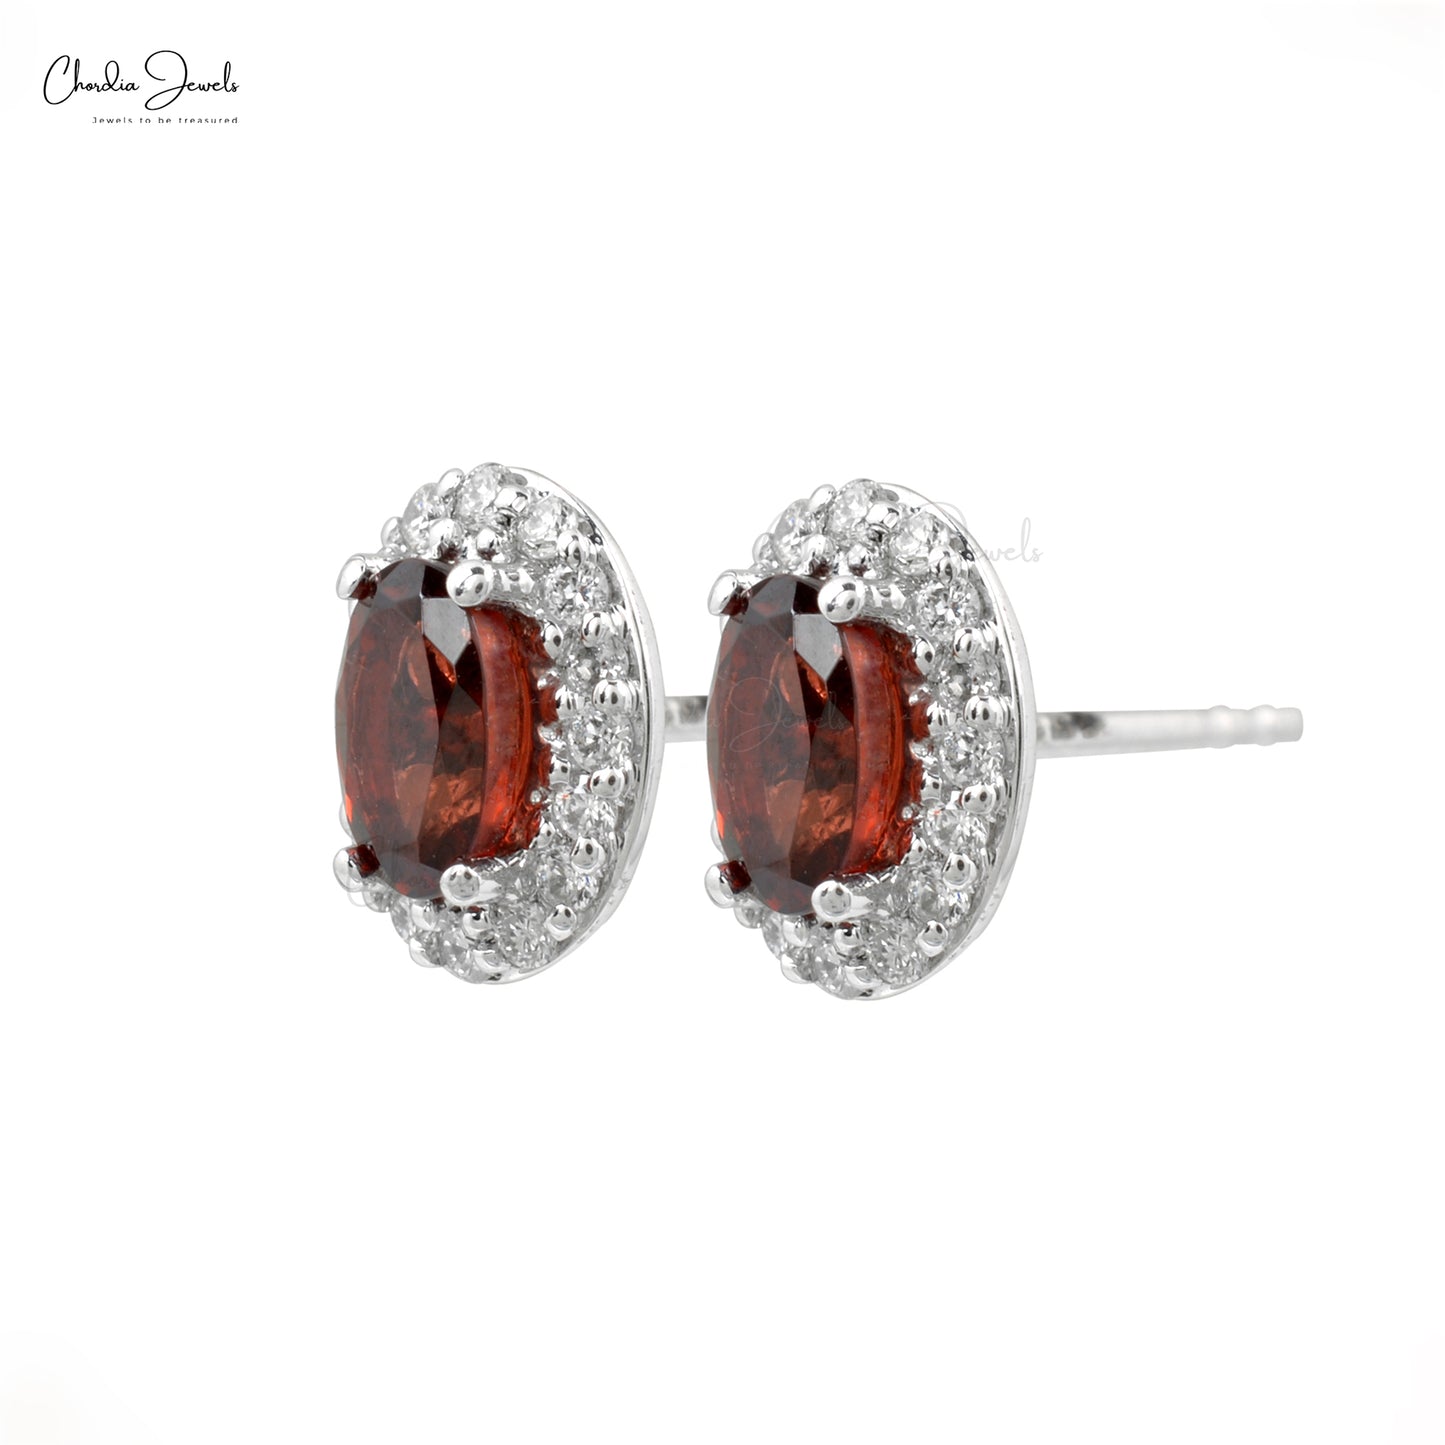 Load image into Gallery viewer, New Trendy Halo Stud Earrings Studded With Diamonds 5x3mm Oval Authentic Red Garnet Gemstone Studs in 14k Real White Gold Jewelry For Her
